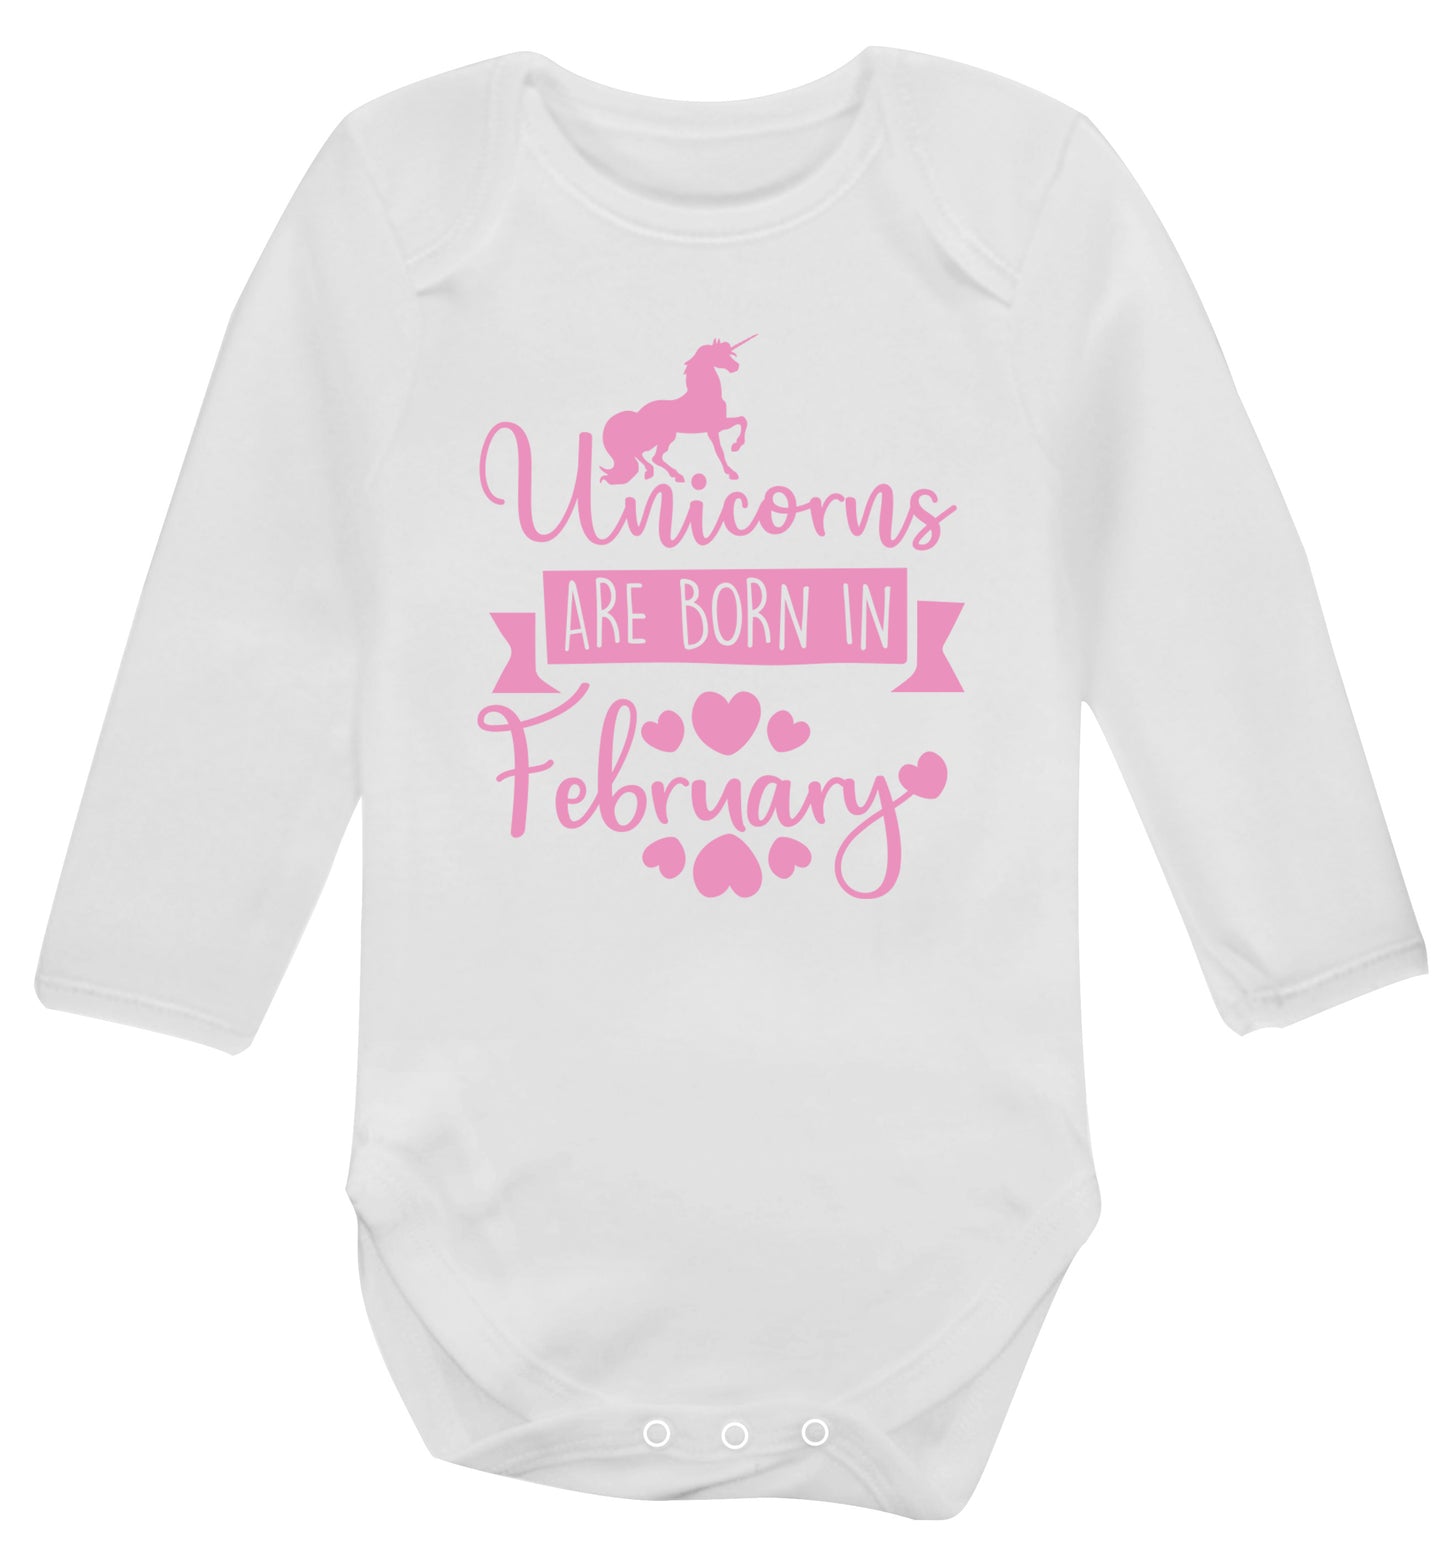 Unicorns are born in February Baby Vest long sleeved white 6-12 months